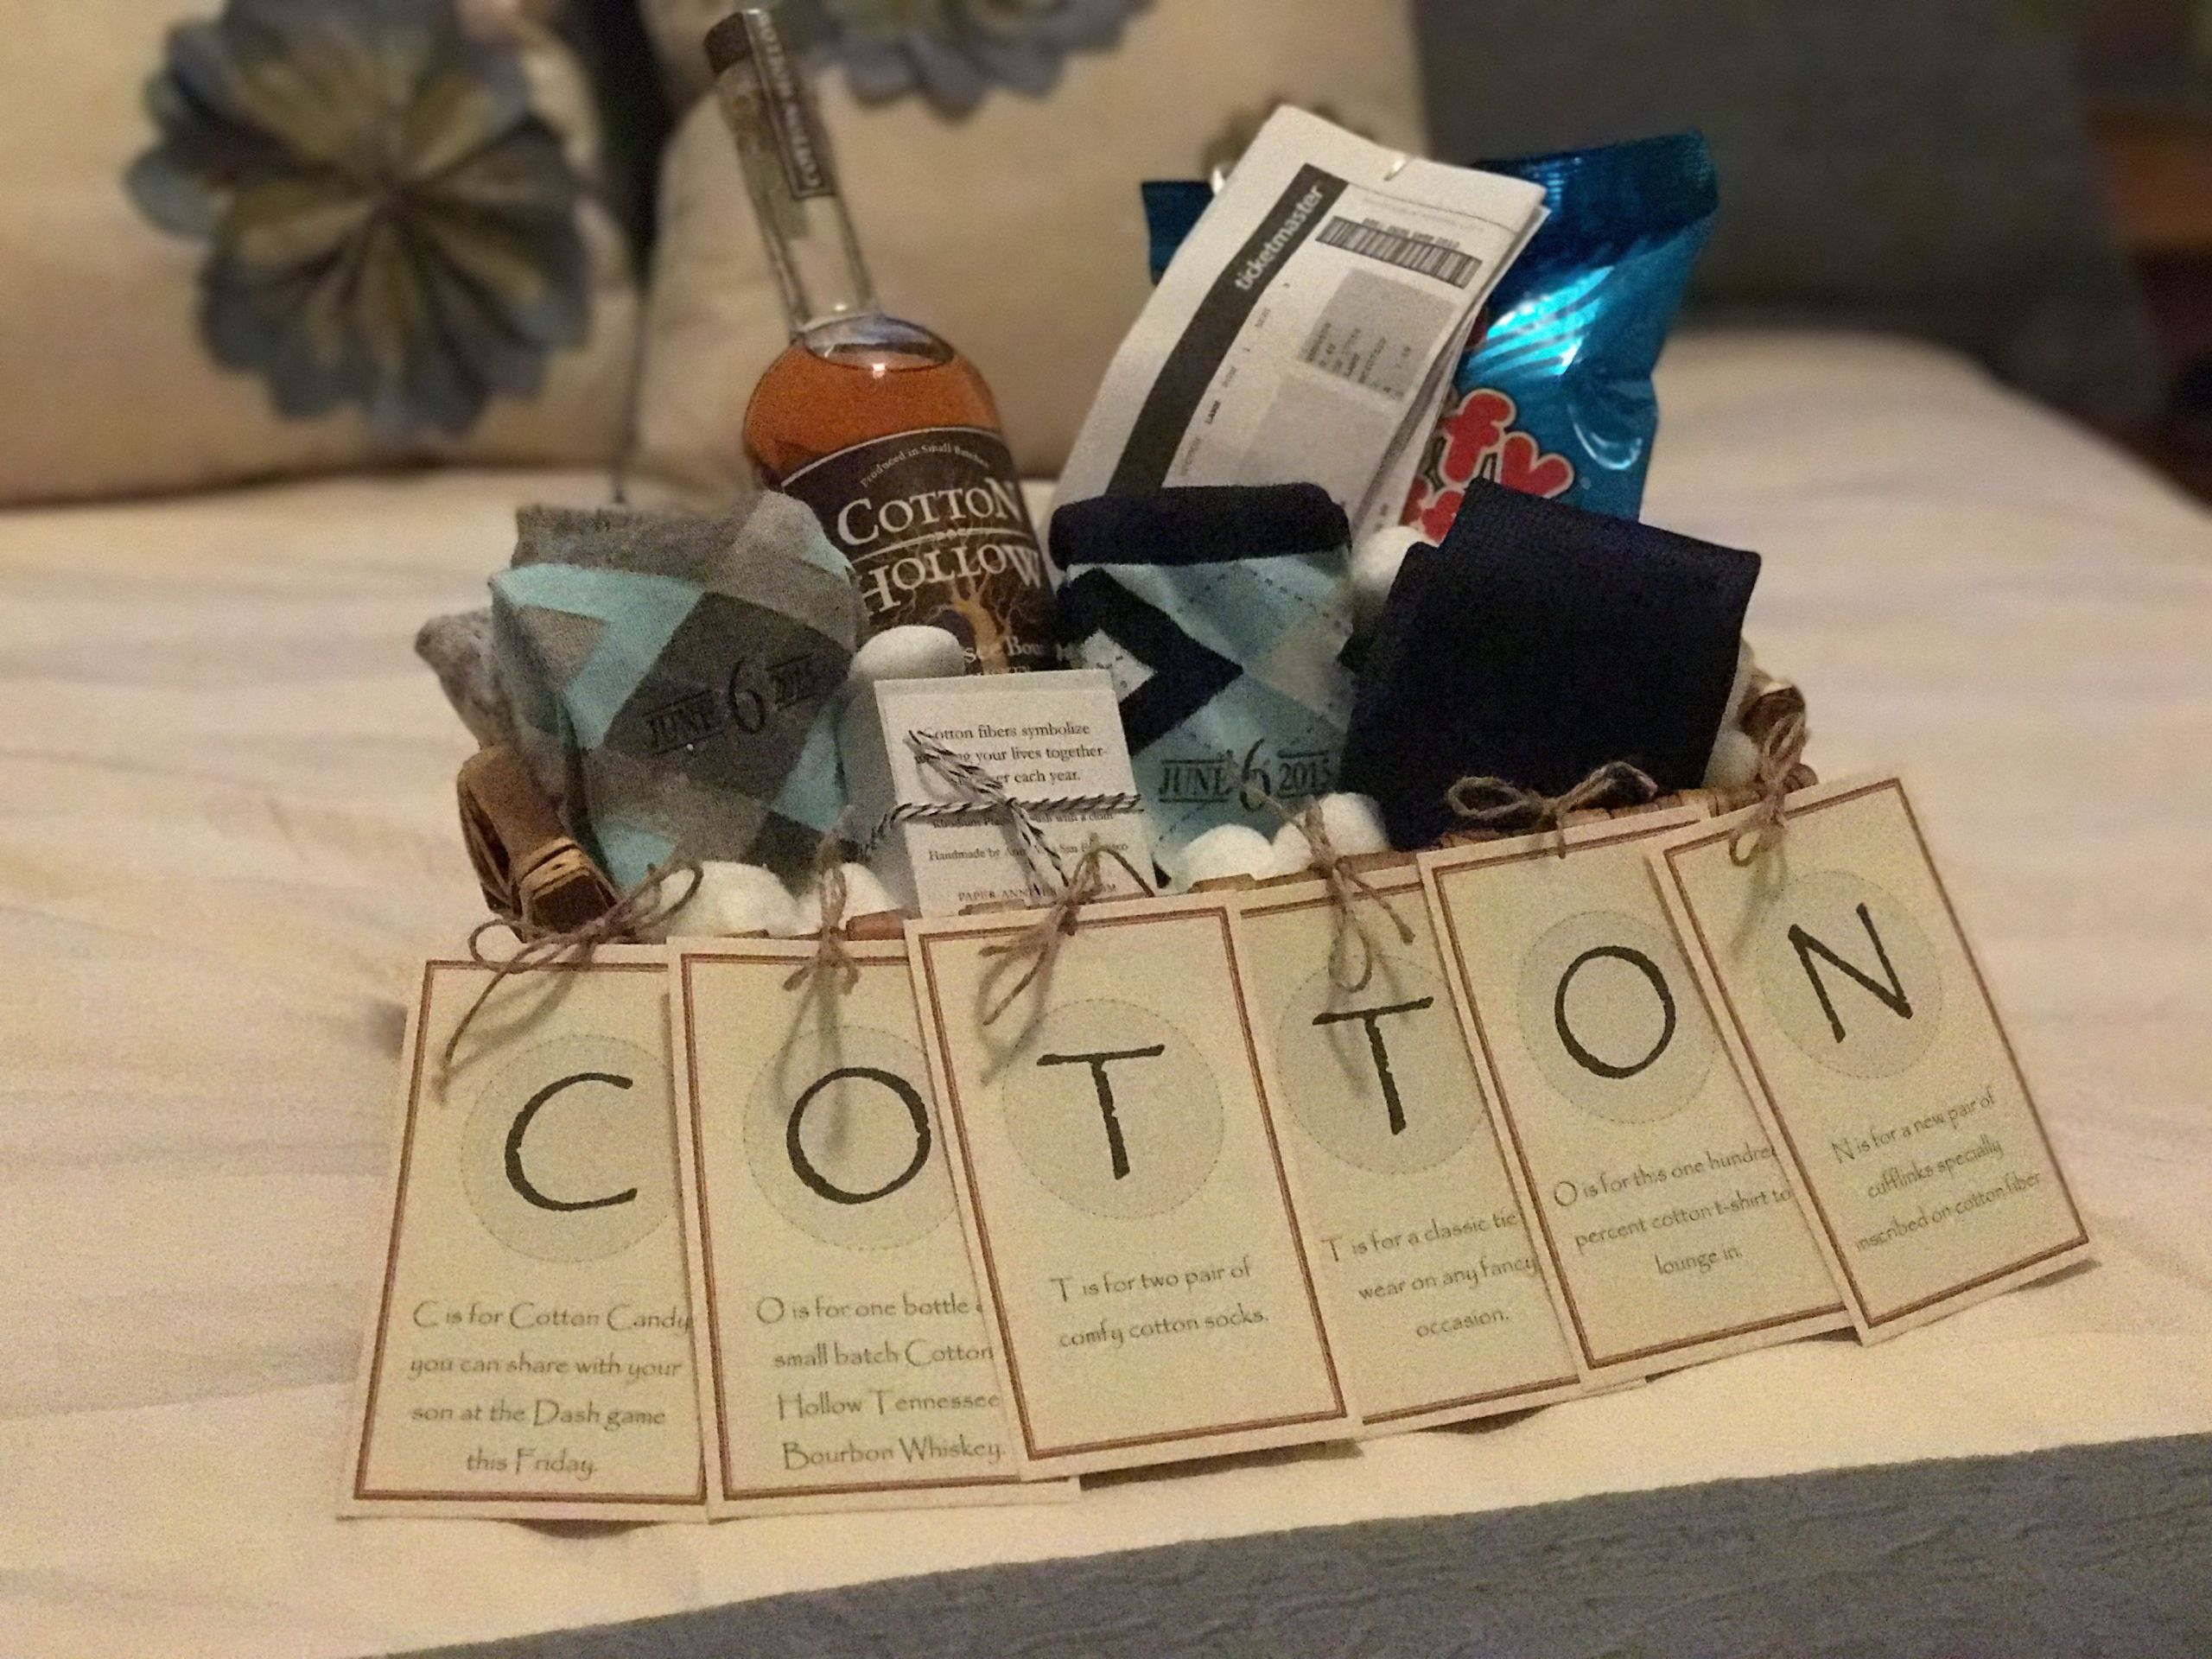 2Nd Anniversary Gift Ideas For Husband
 The "Cotton" Anniversary Gift for Him